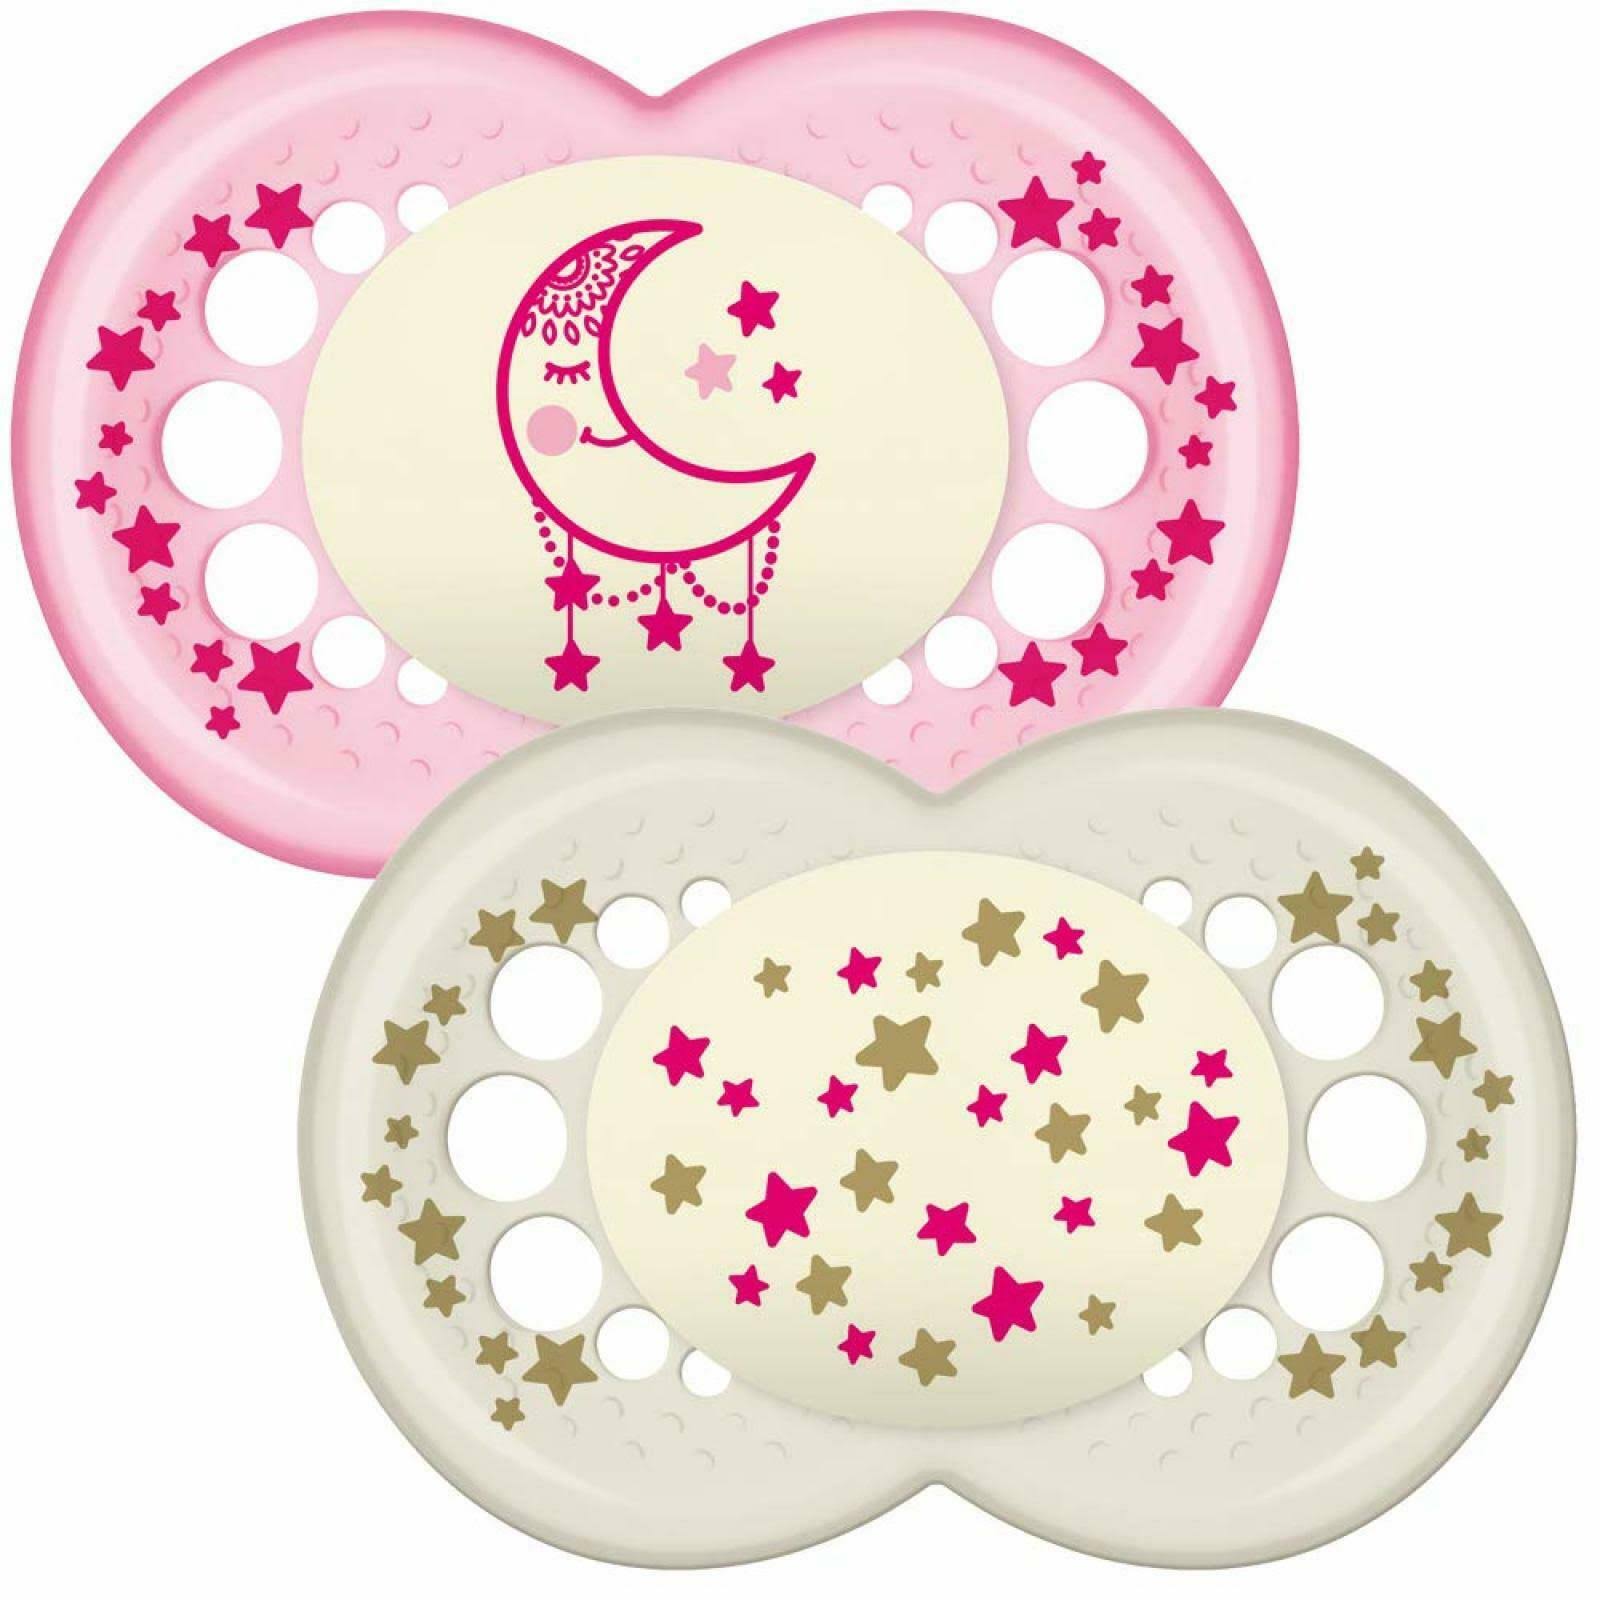 MAM Night 12+ Months Soother - Pink